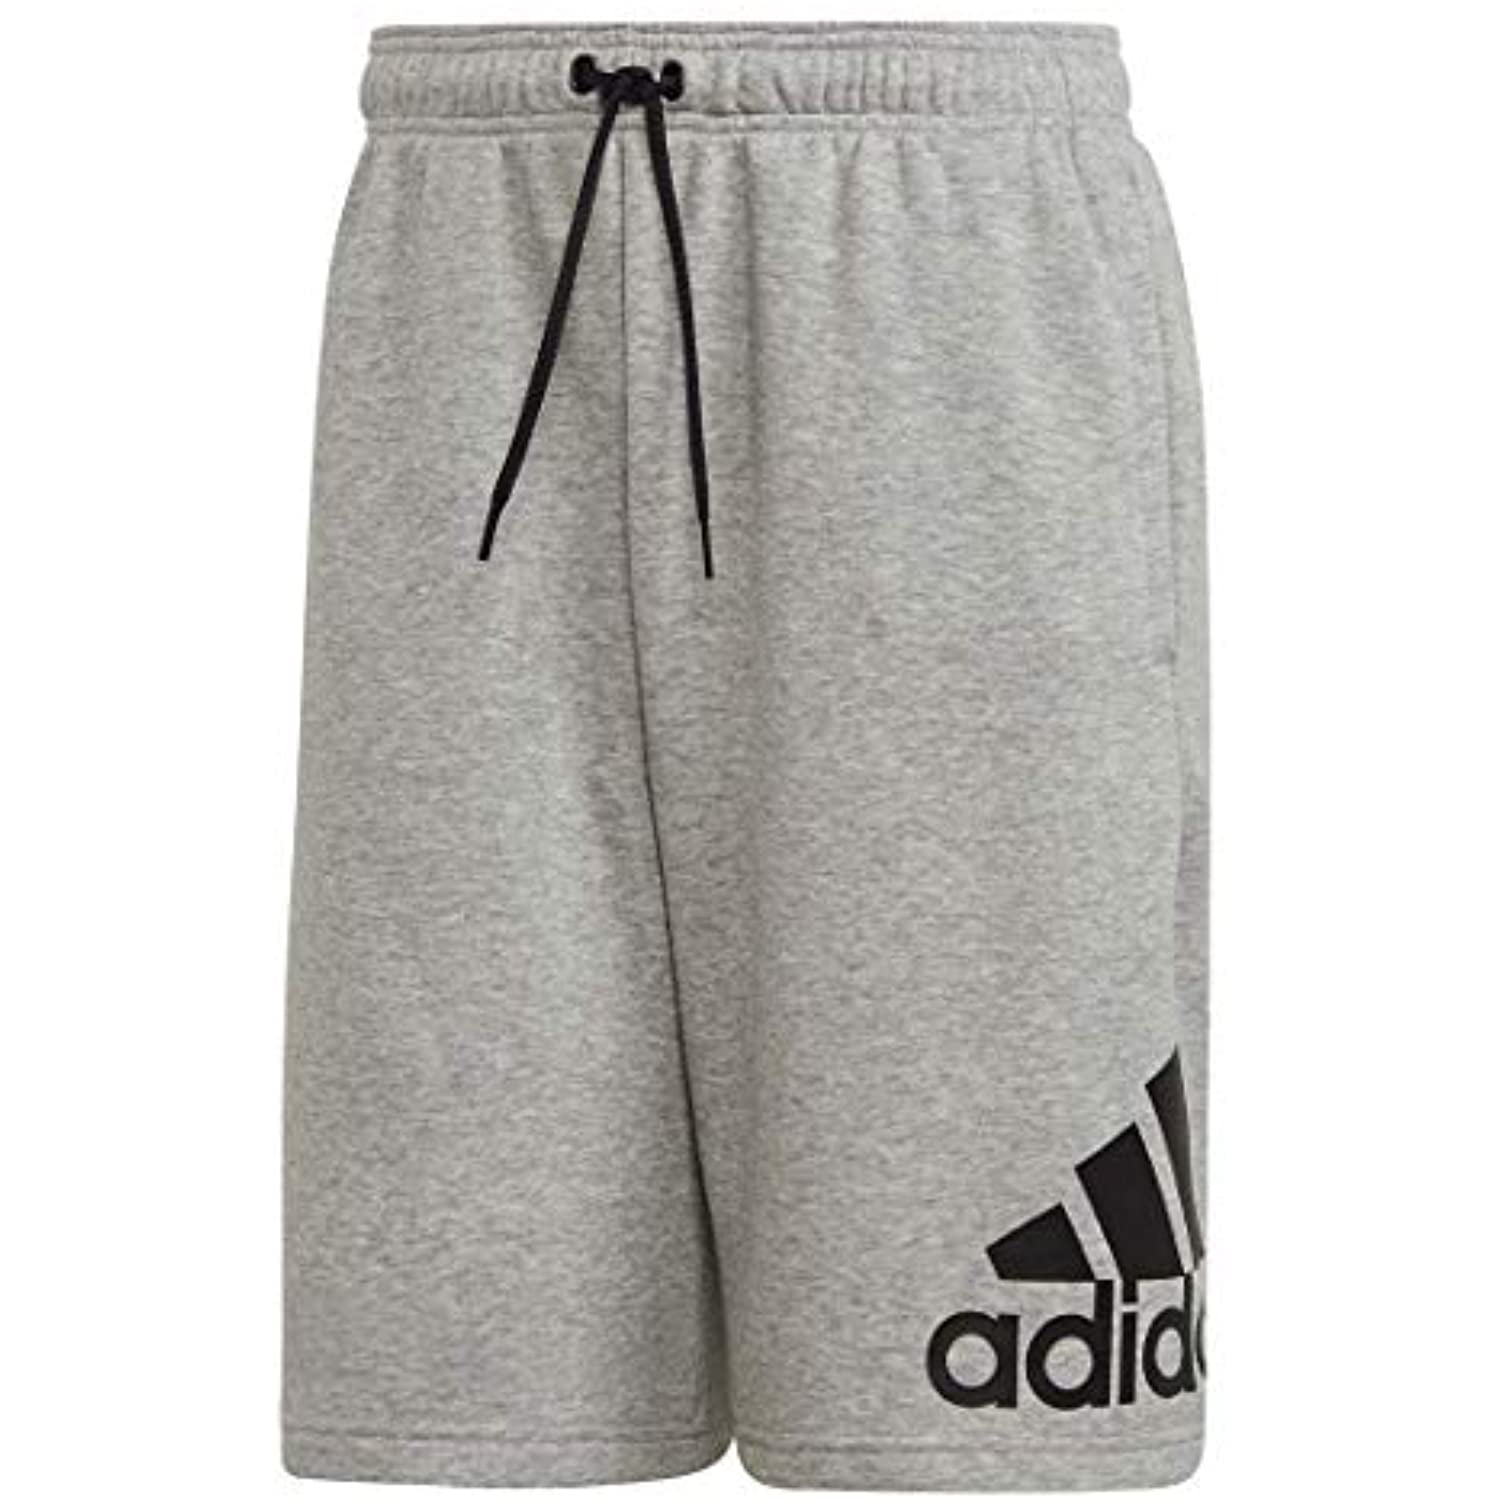 adidas Men\'s Must Haves Badge of Sport French Terry Shorts, Medium Grey  Heather, X-Small